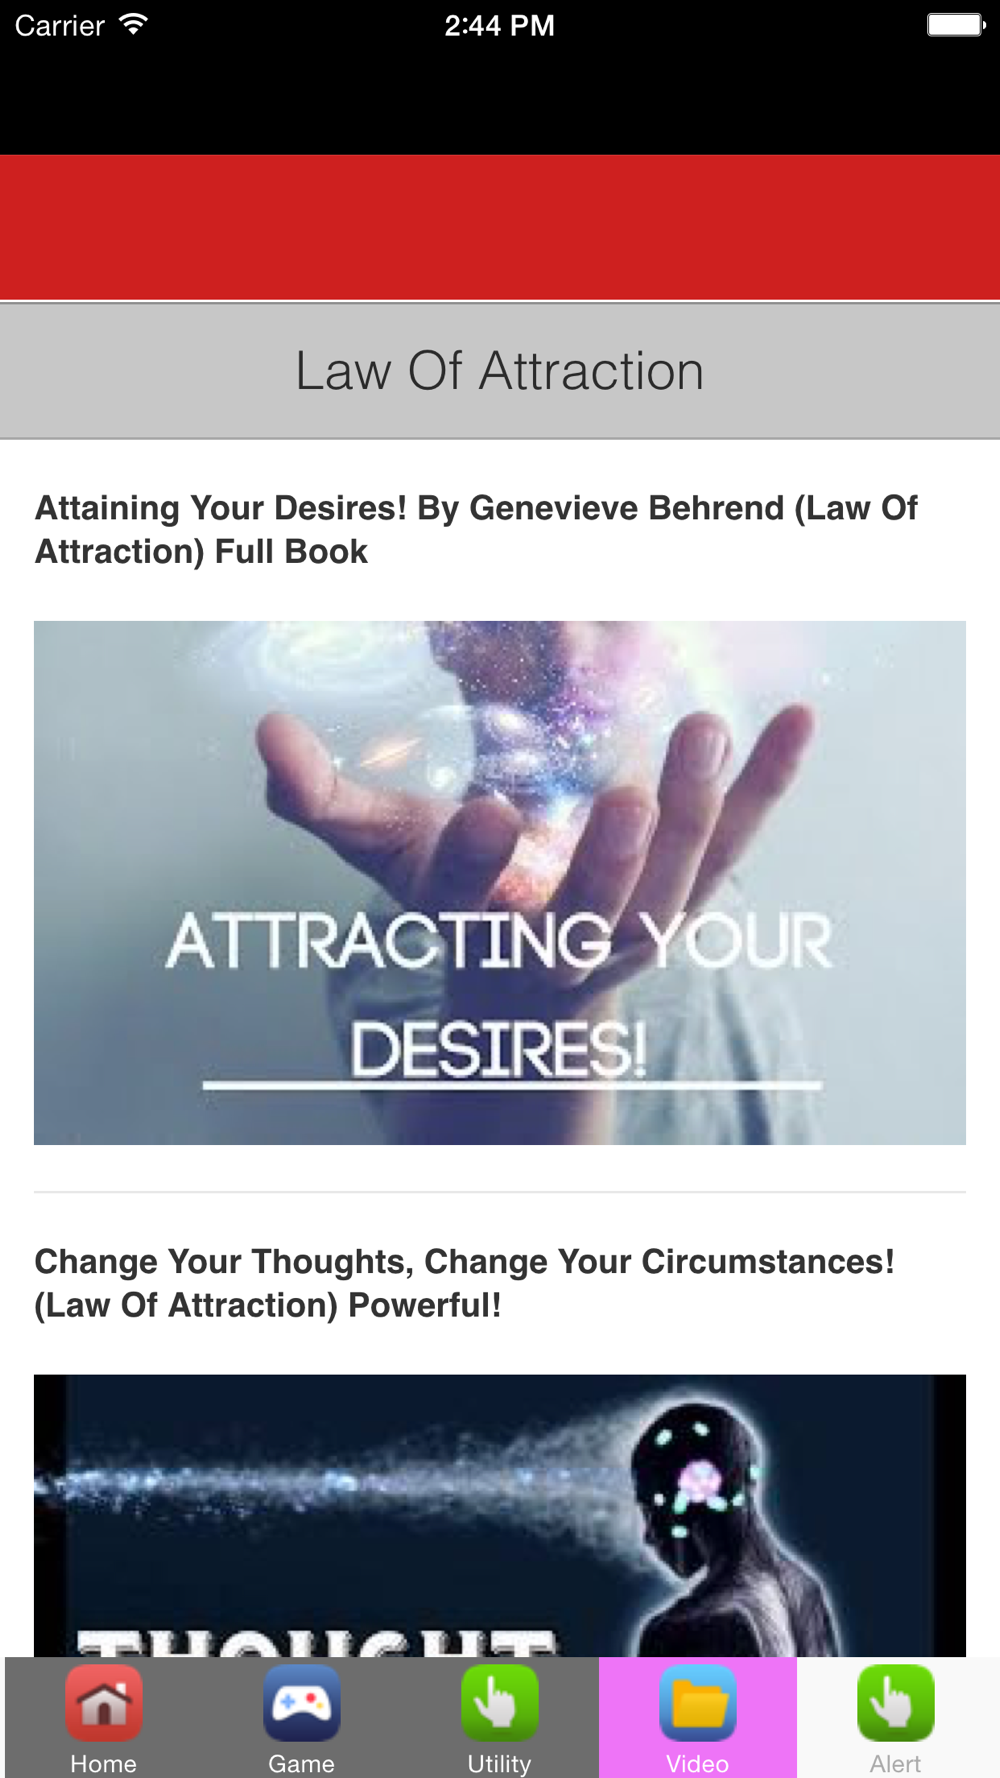 Law of attraction tools by david marshall